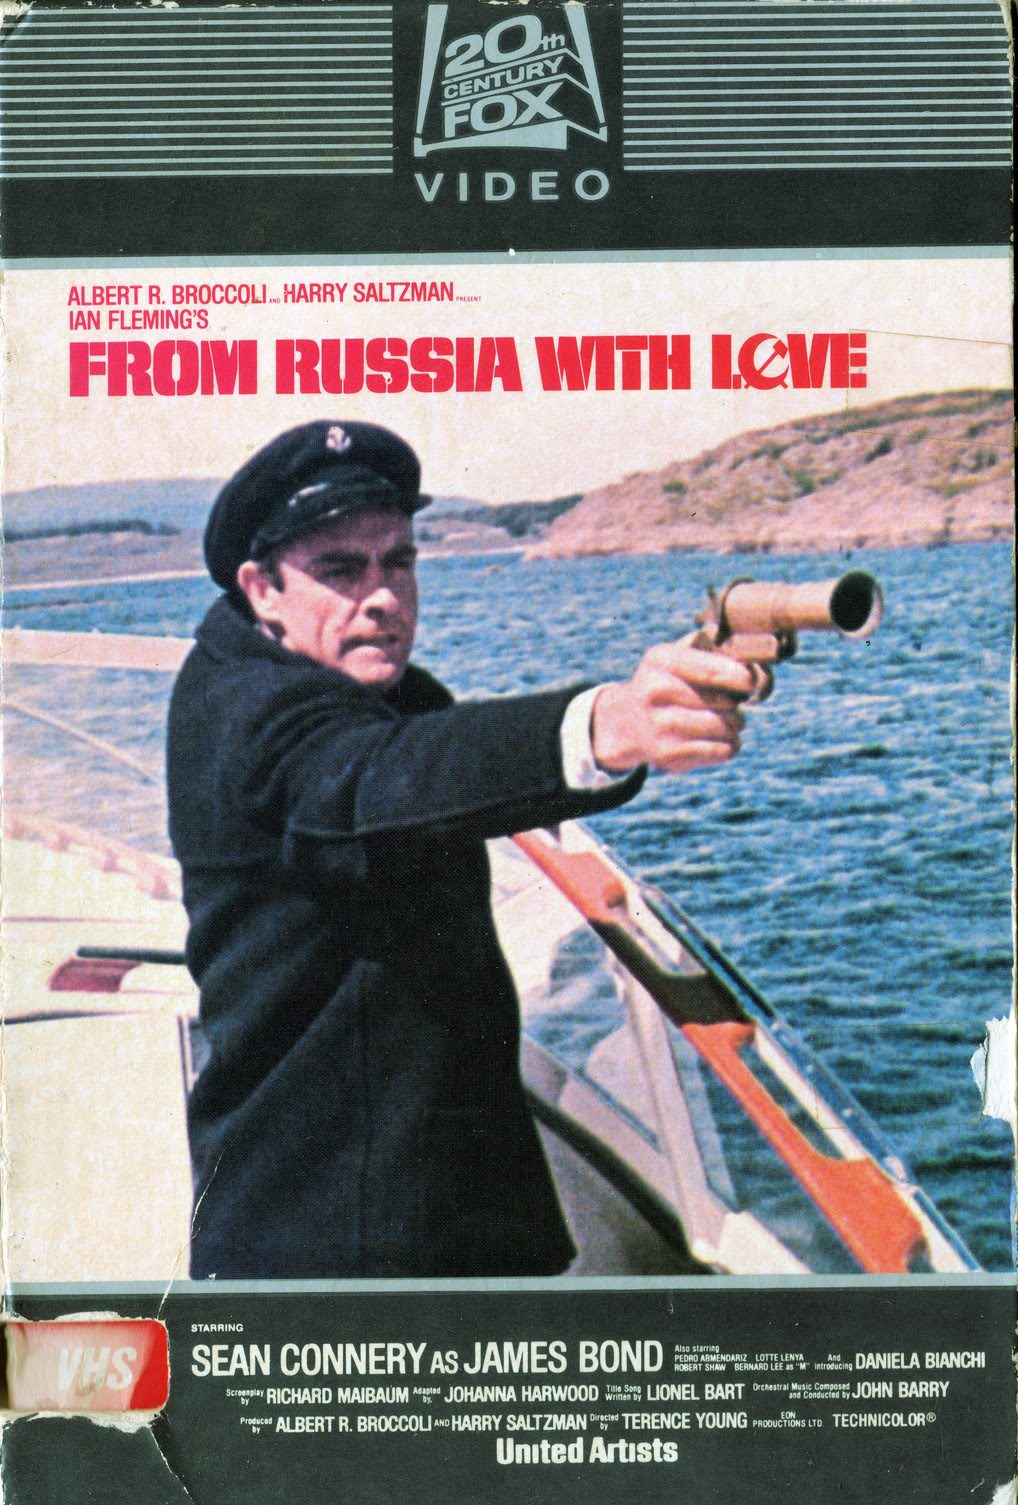 From Russia with Love/Home media | Moviepedia | Fandom